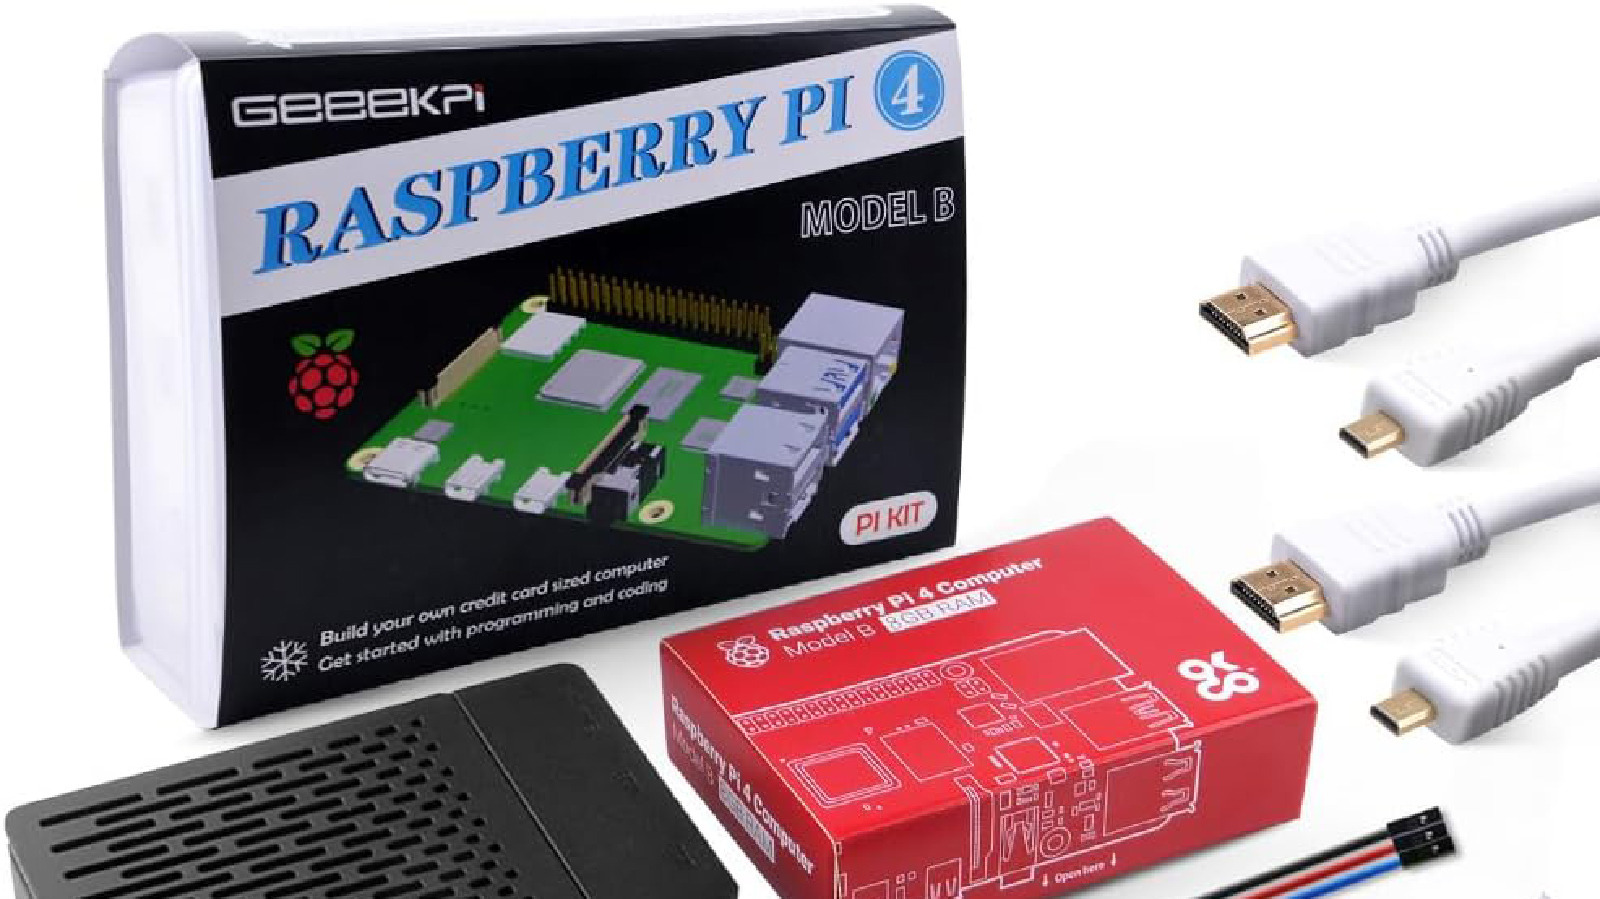 Raspberry Pi 2 Complete Starter Kit with WiFi Adapter